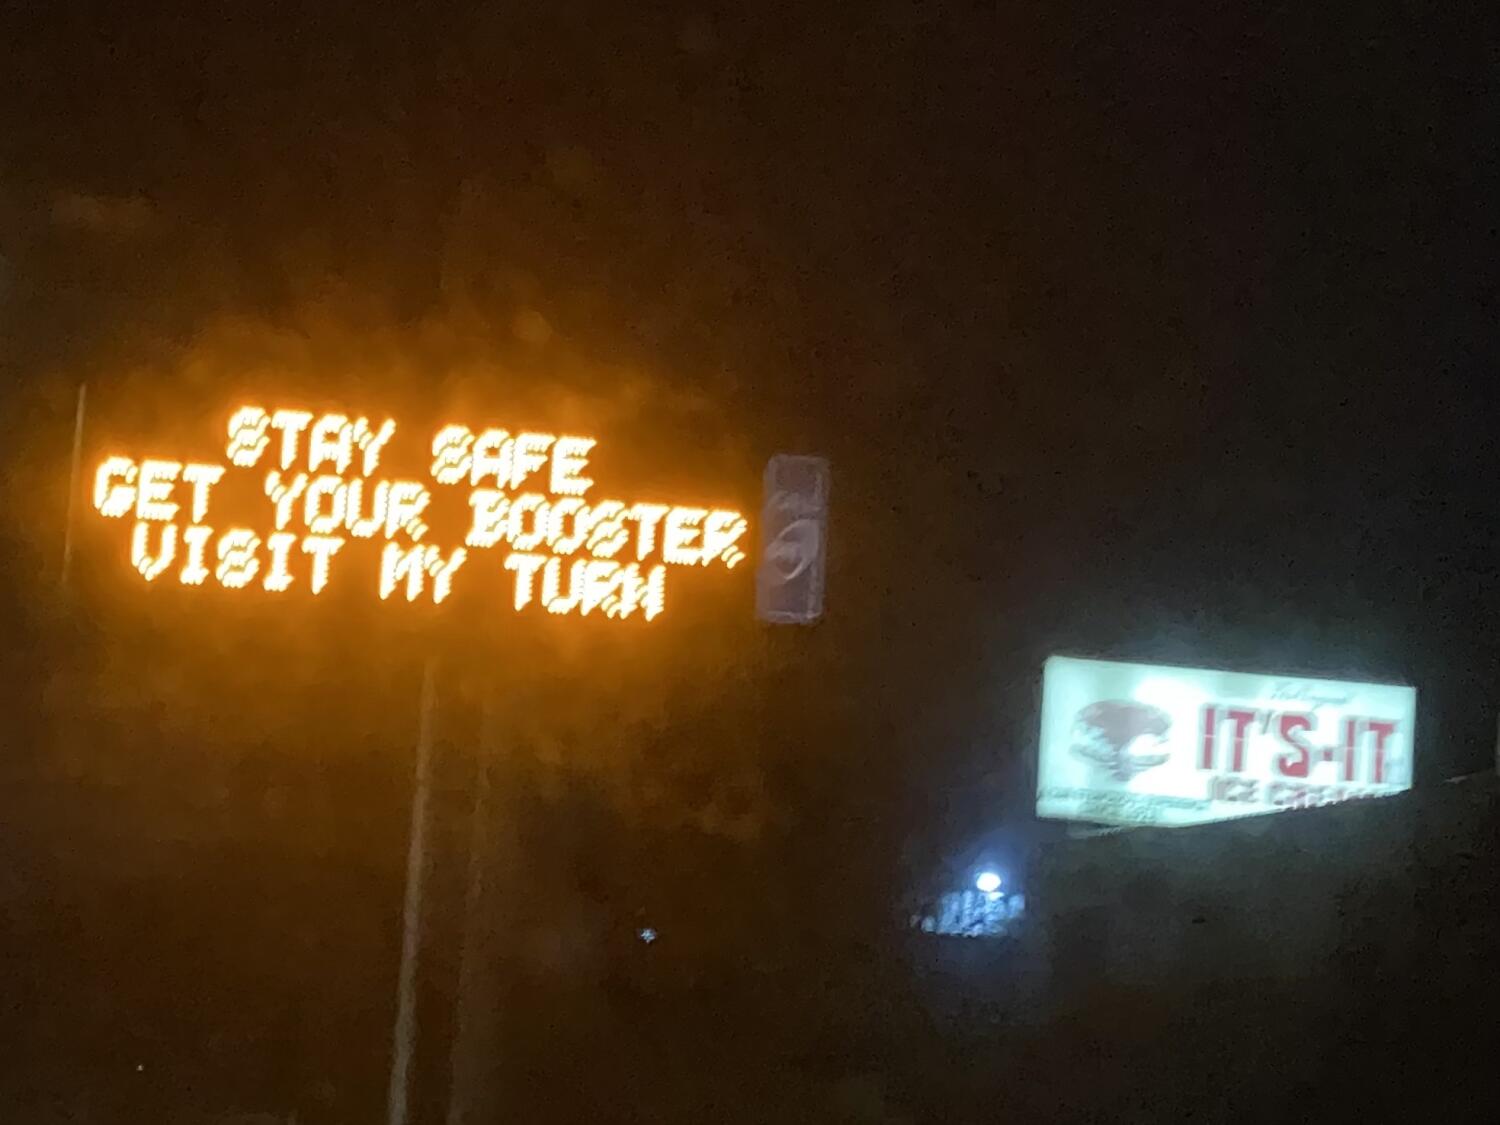 Eyes on the road: U.S. agency bans humor from highway signs so drivers keep focus on safety